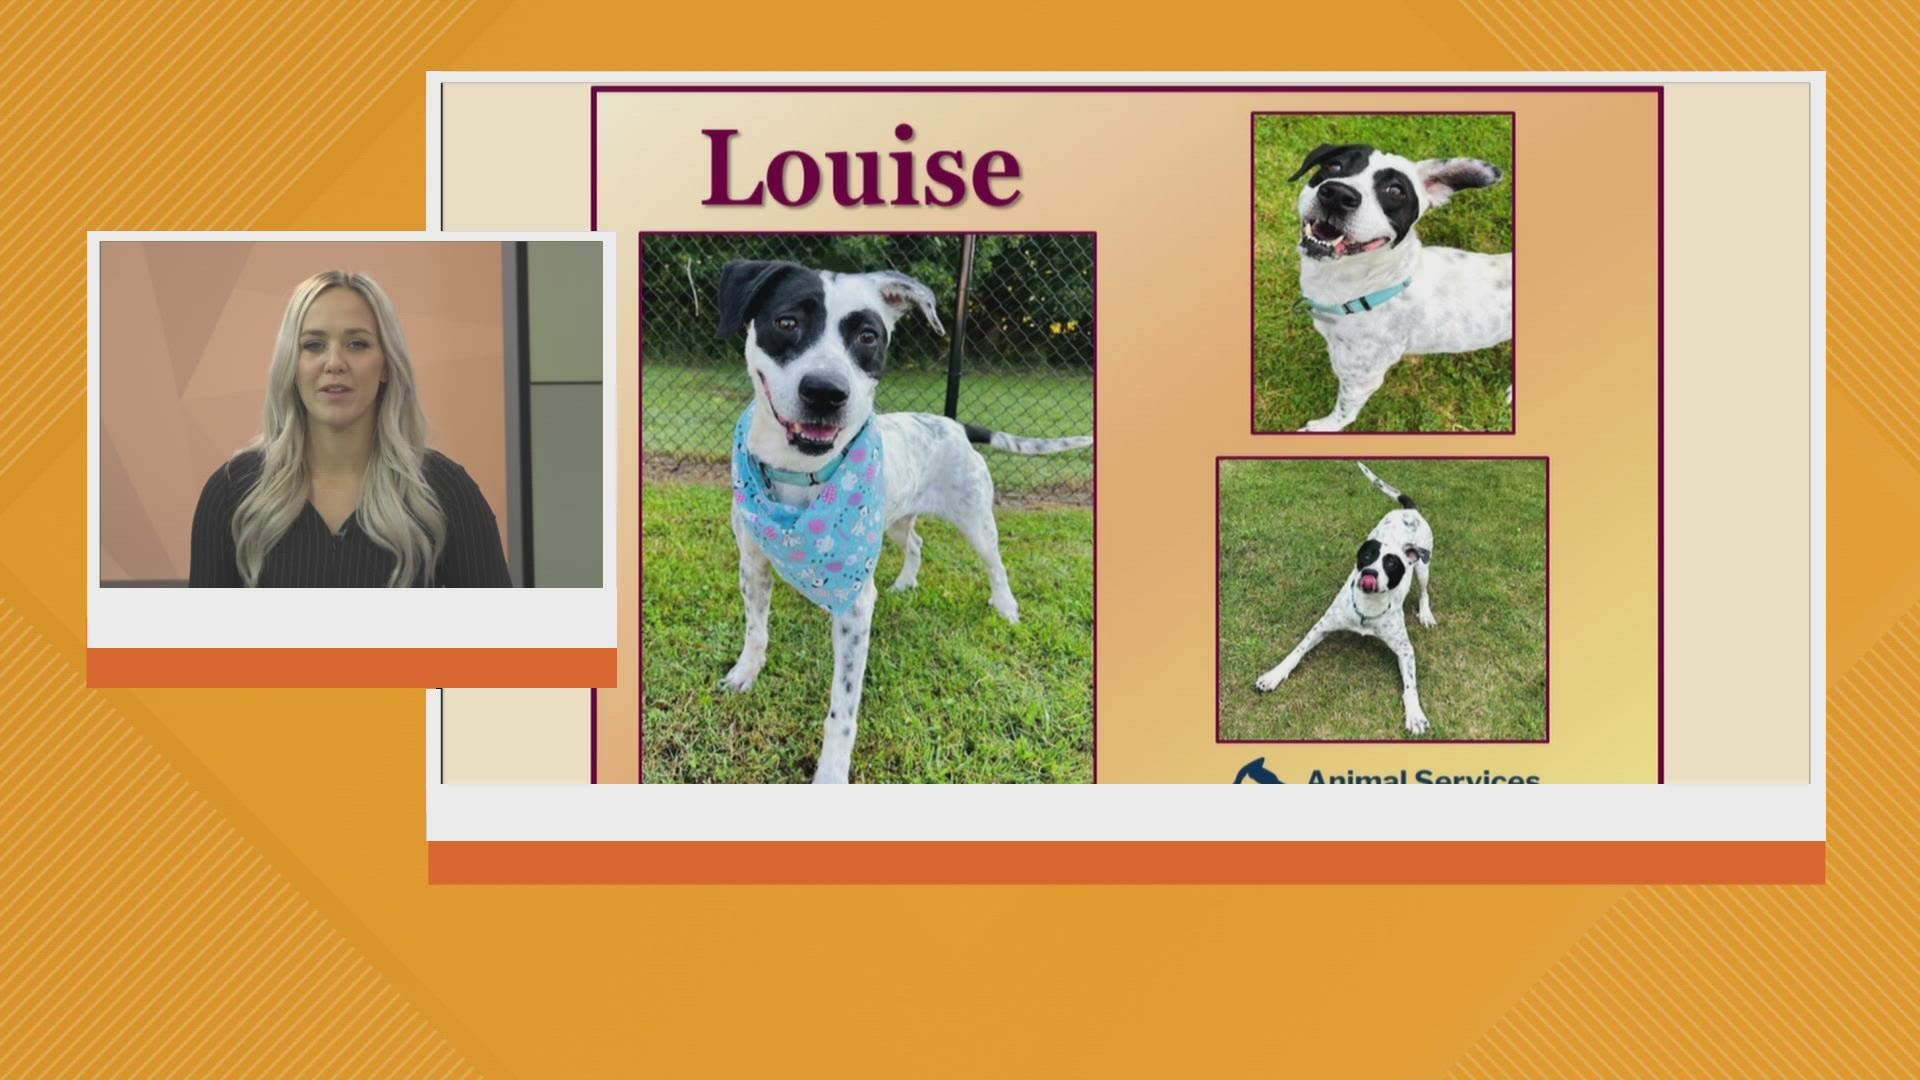 Lets get Louise adopted!